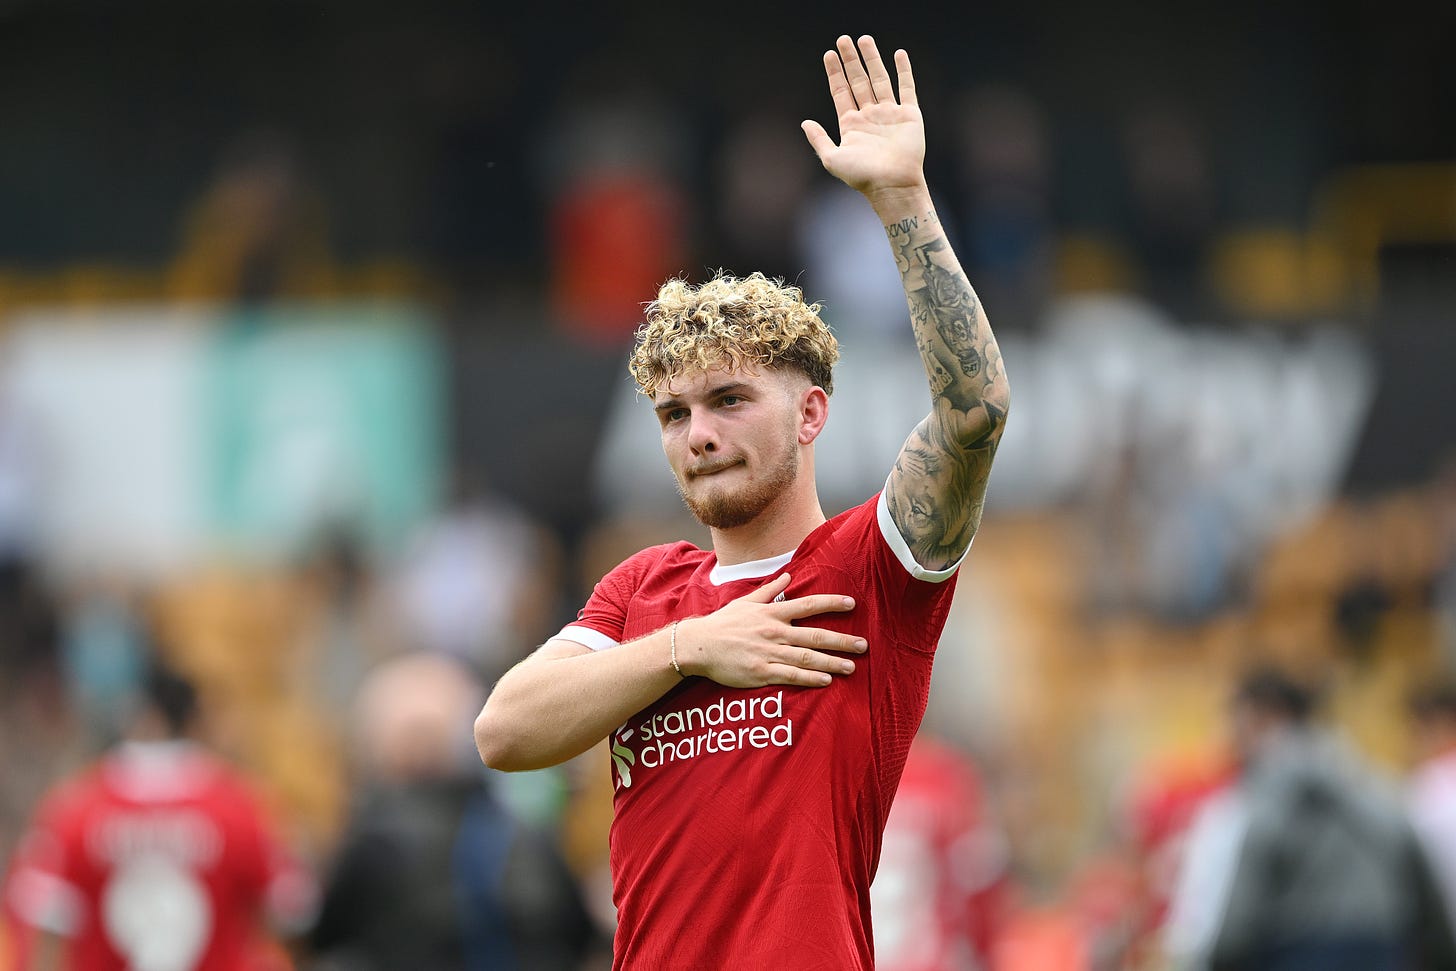 Liverpool midfielder Harvey Elliott raises his left arm to salute fans after the Reds' 3-1 win at Wolves